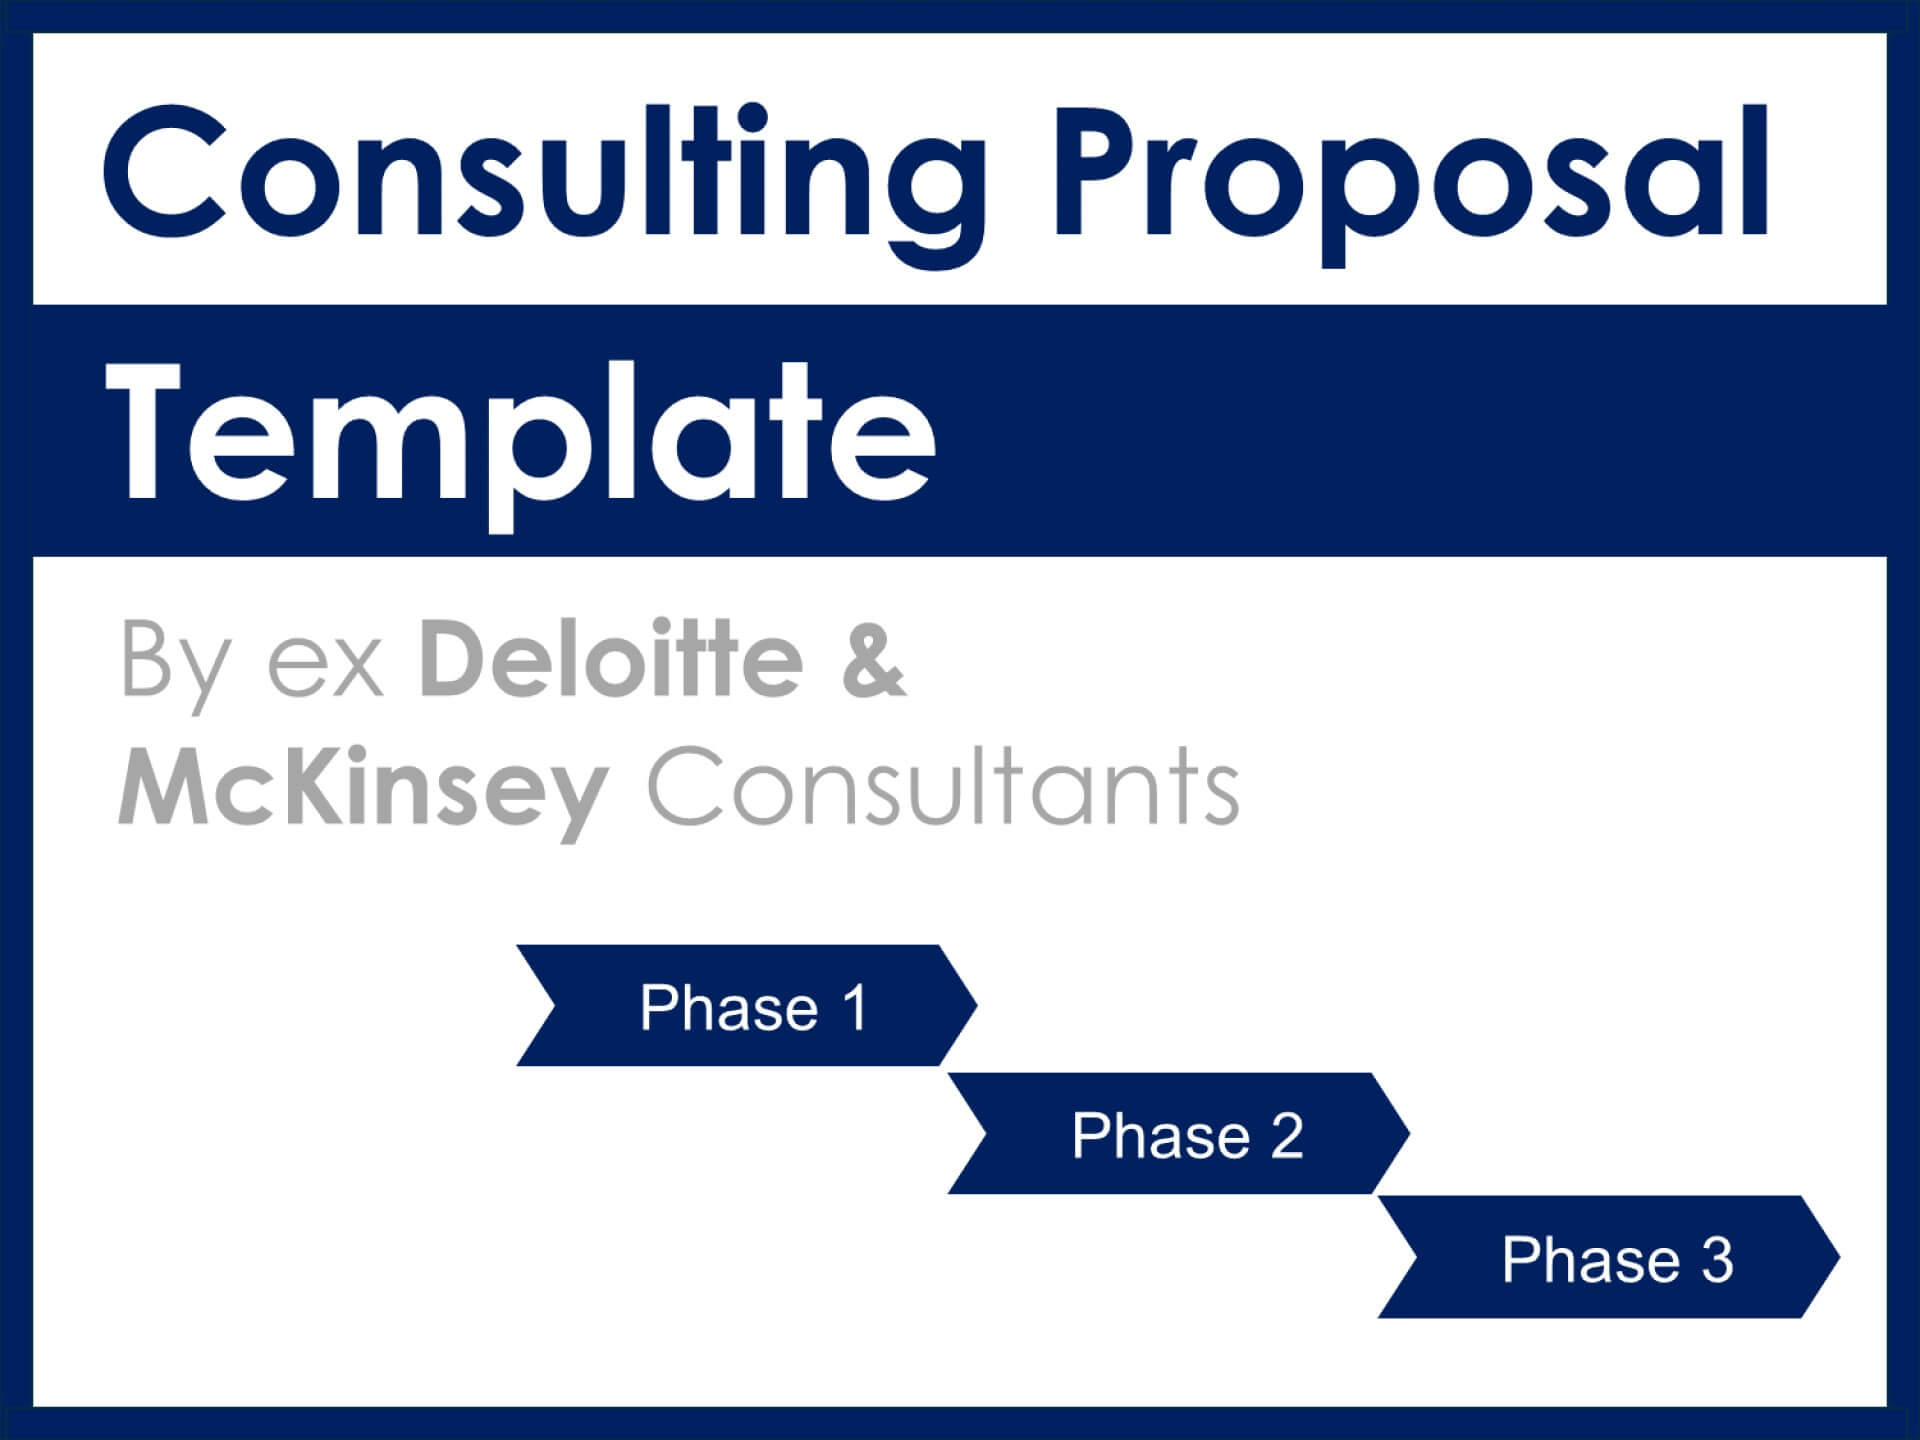 006 Dtw Wzkw0Ae Tf Consulting Proposal Template Mckinsey Intended For Mckinsey Consulting Report Template